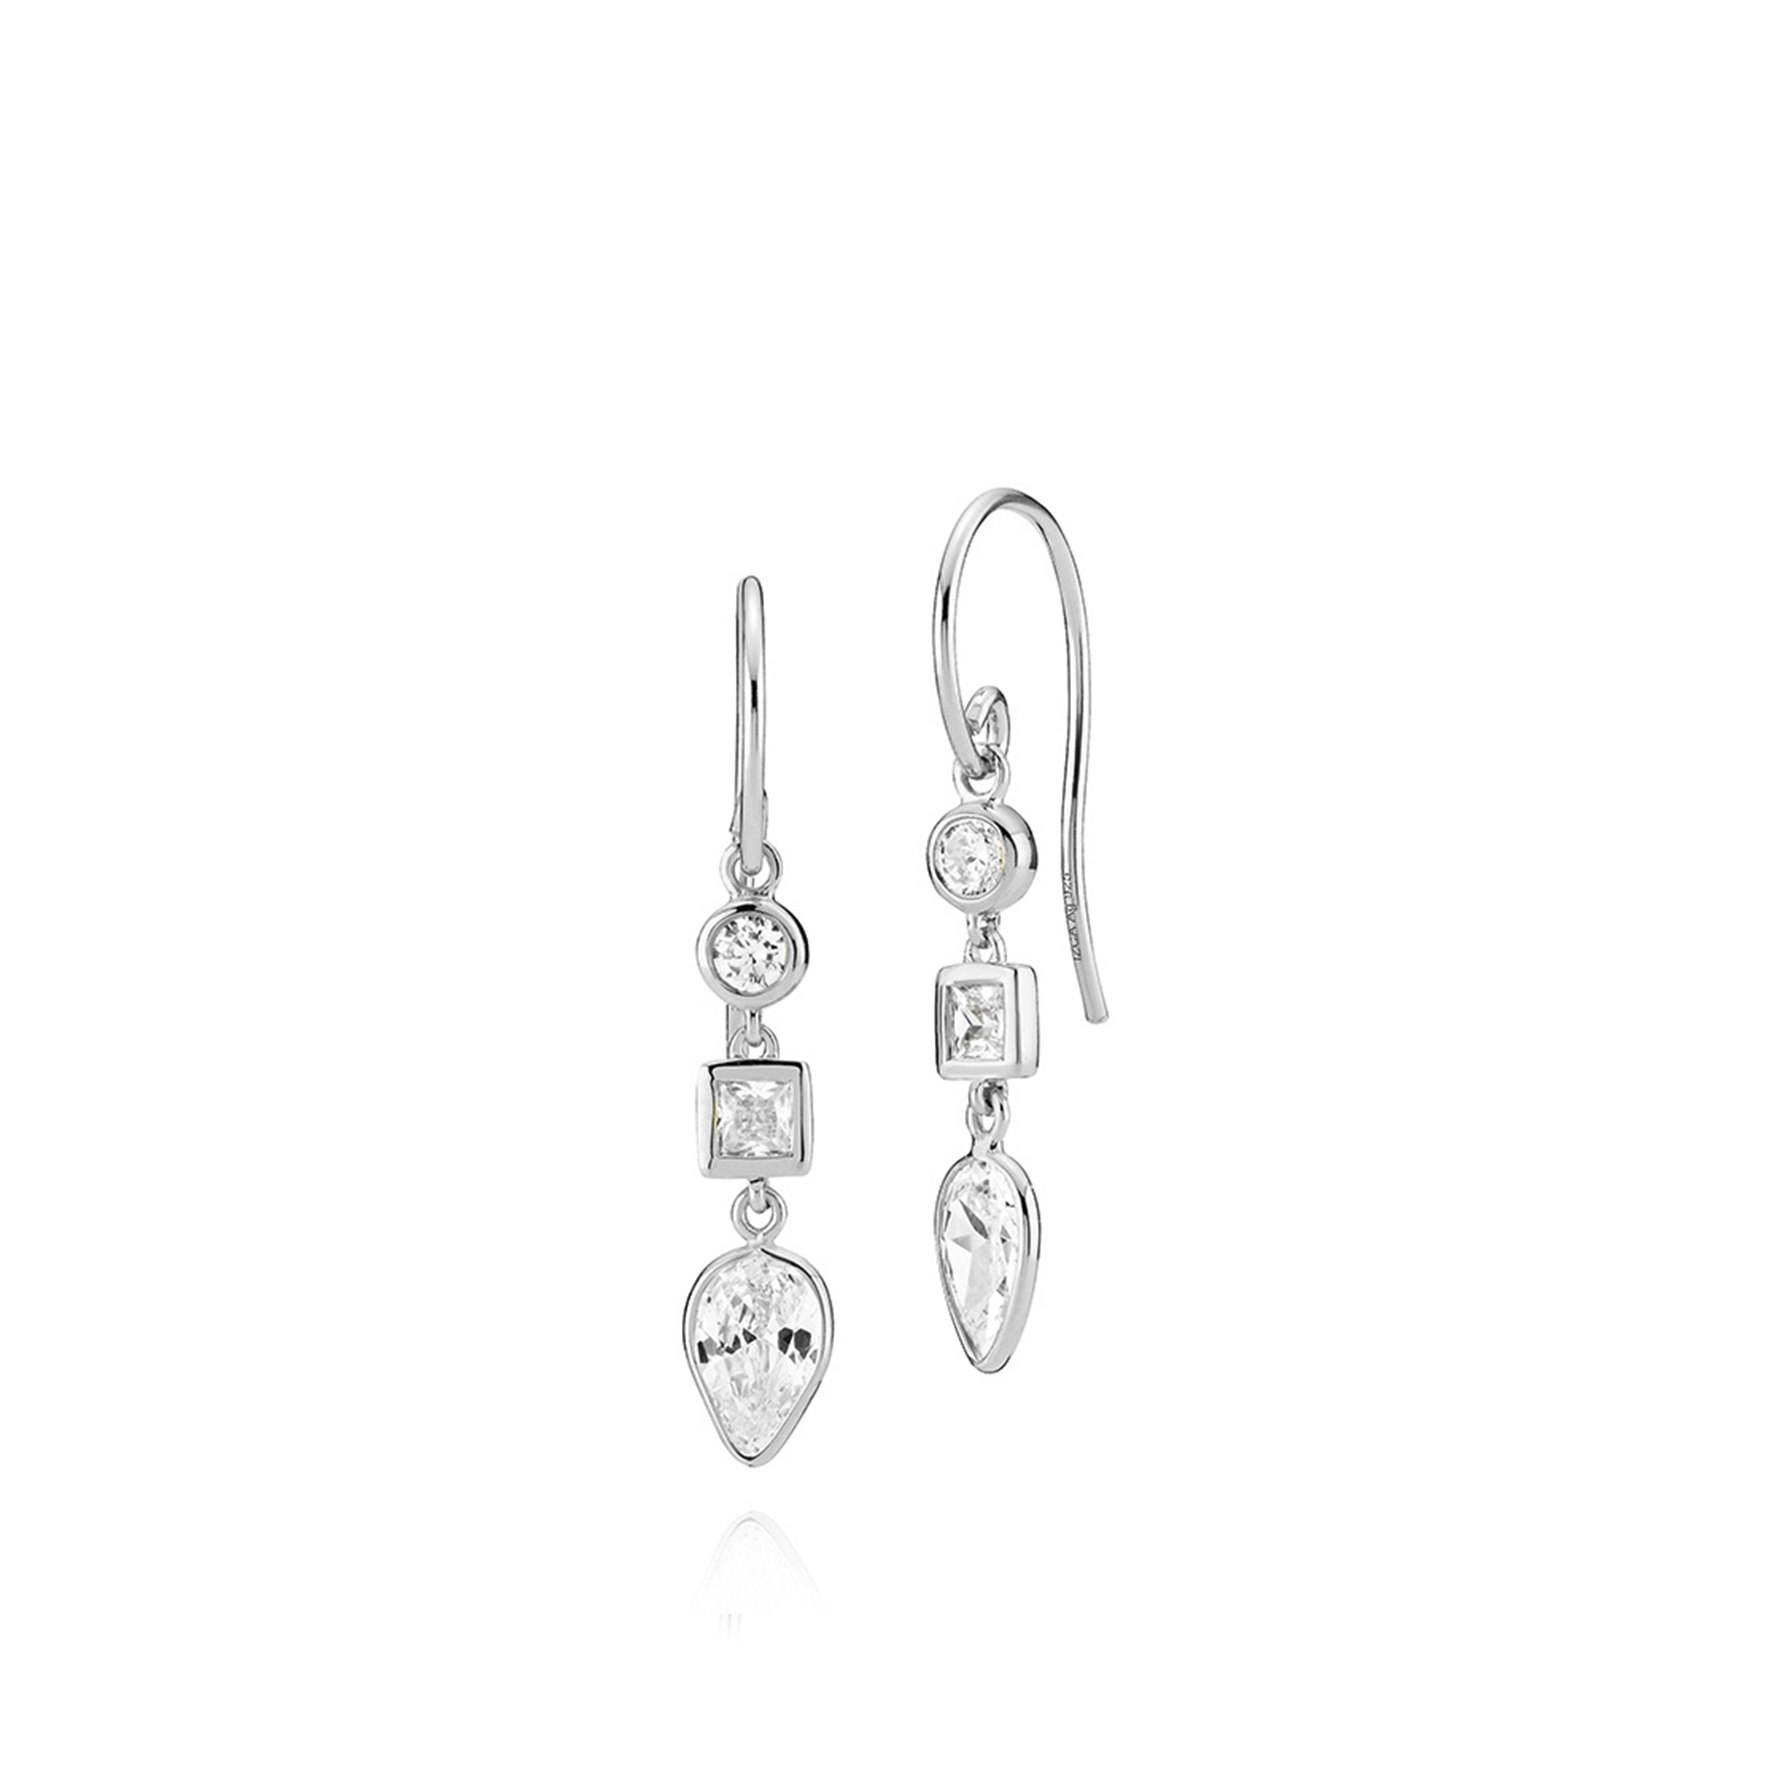 Aya Large Earrings from Izabel Camille in Silver Sterling 925